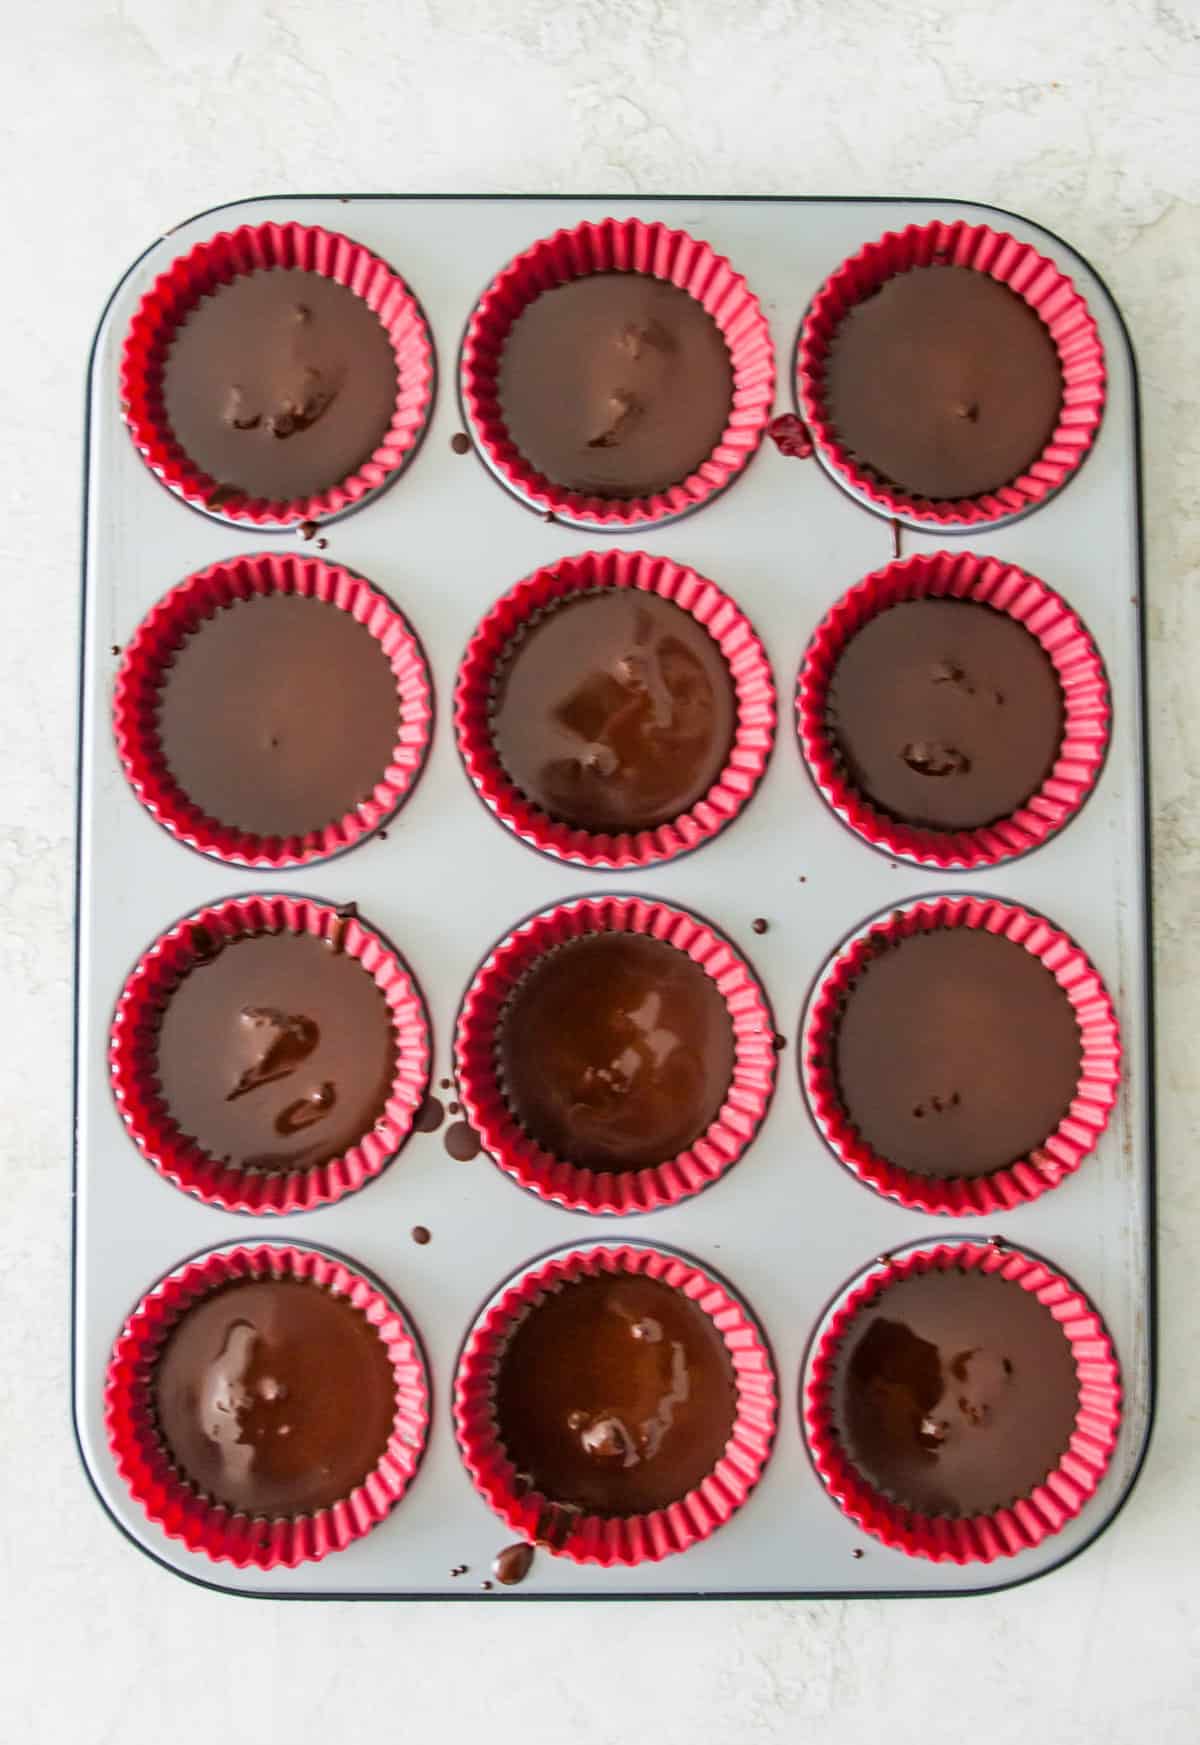 A muffin tray lined with silicone muffin cups and each one has melted chocolate in it.